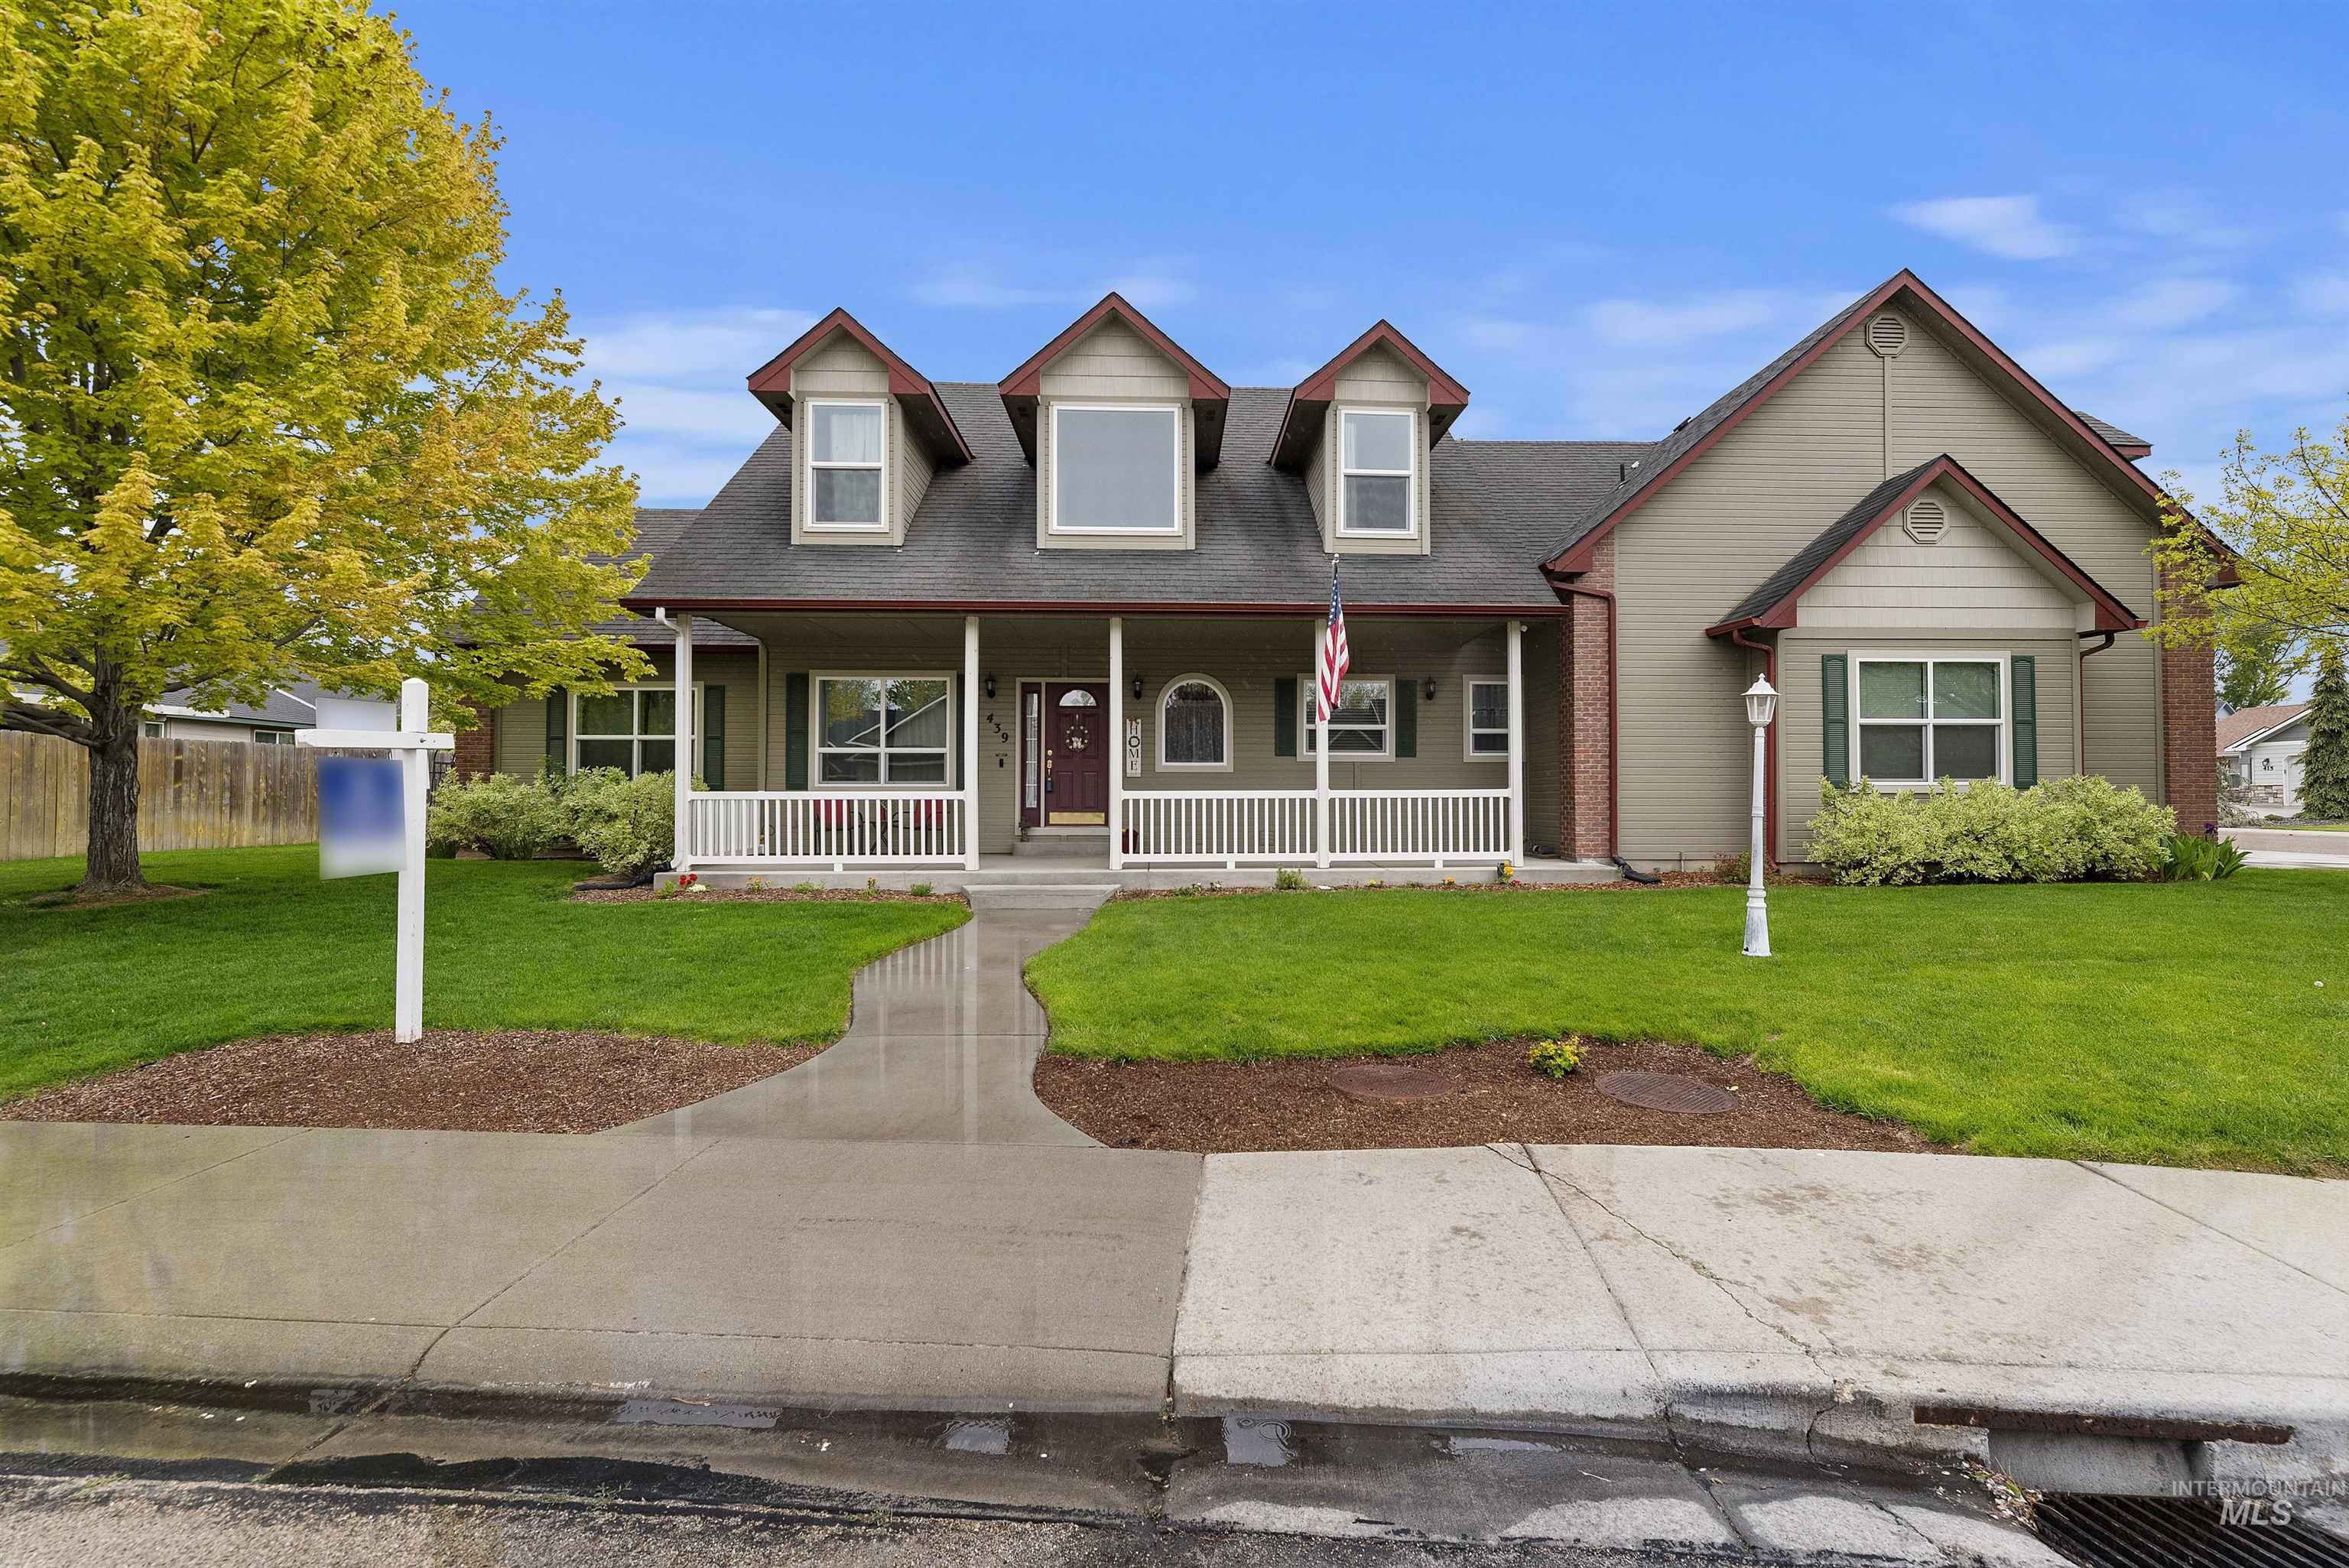 Nampa home for sale